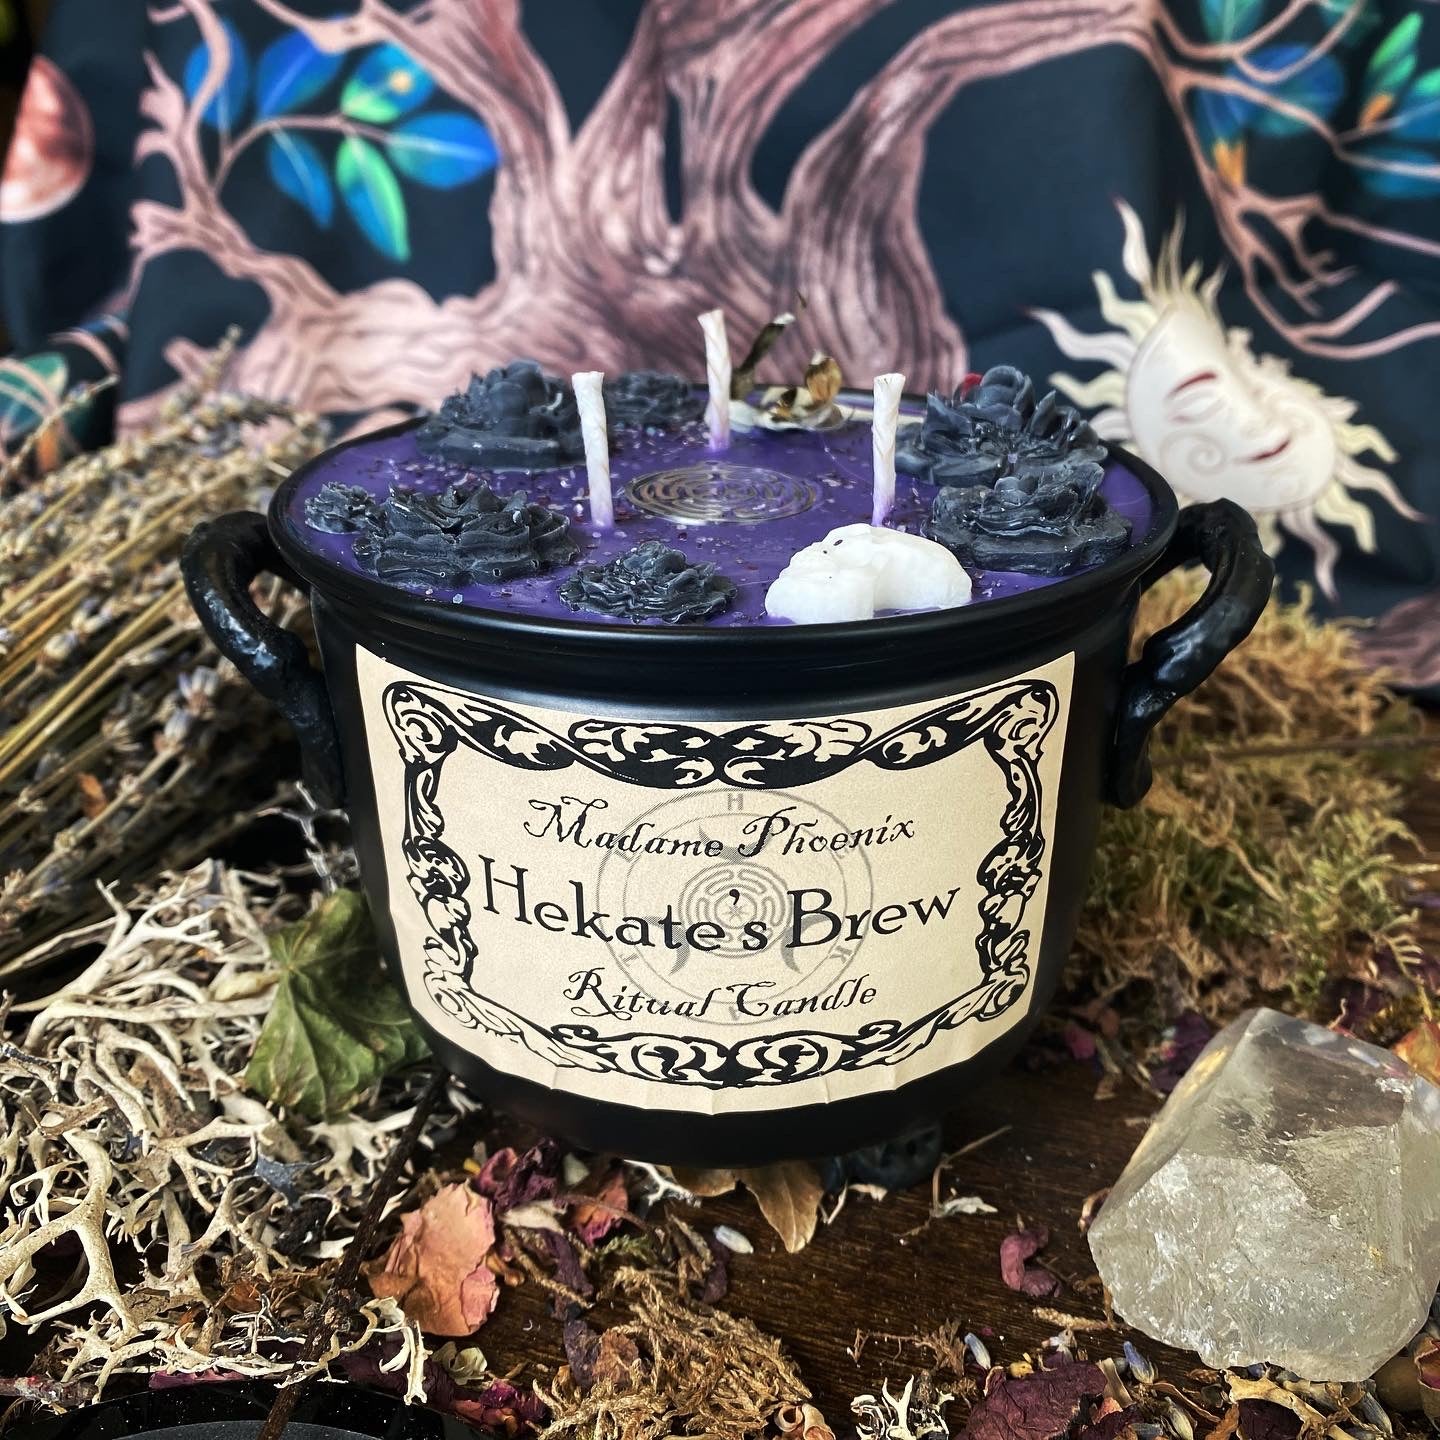 Hekate's Brew Cauldron Candle